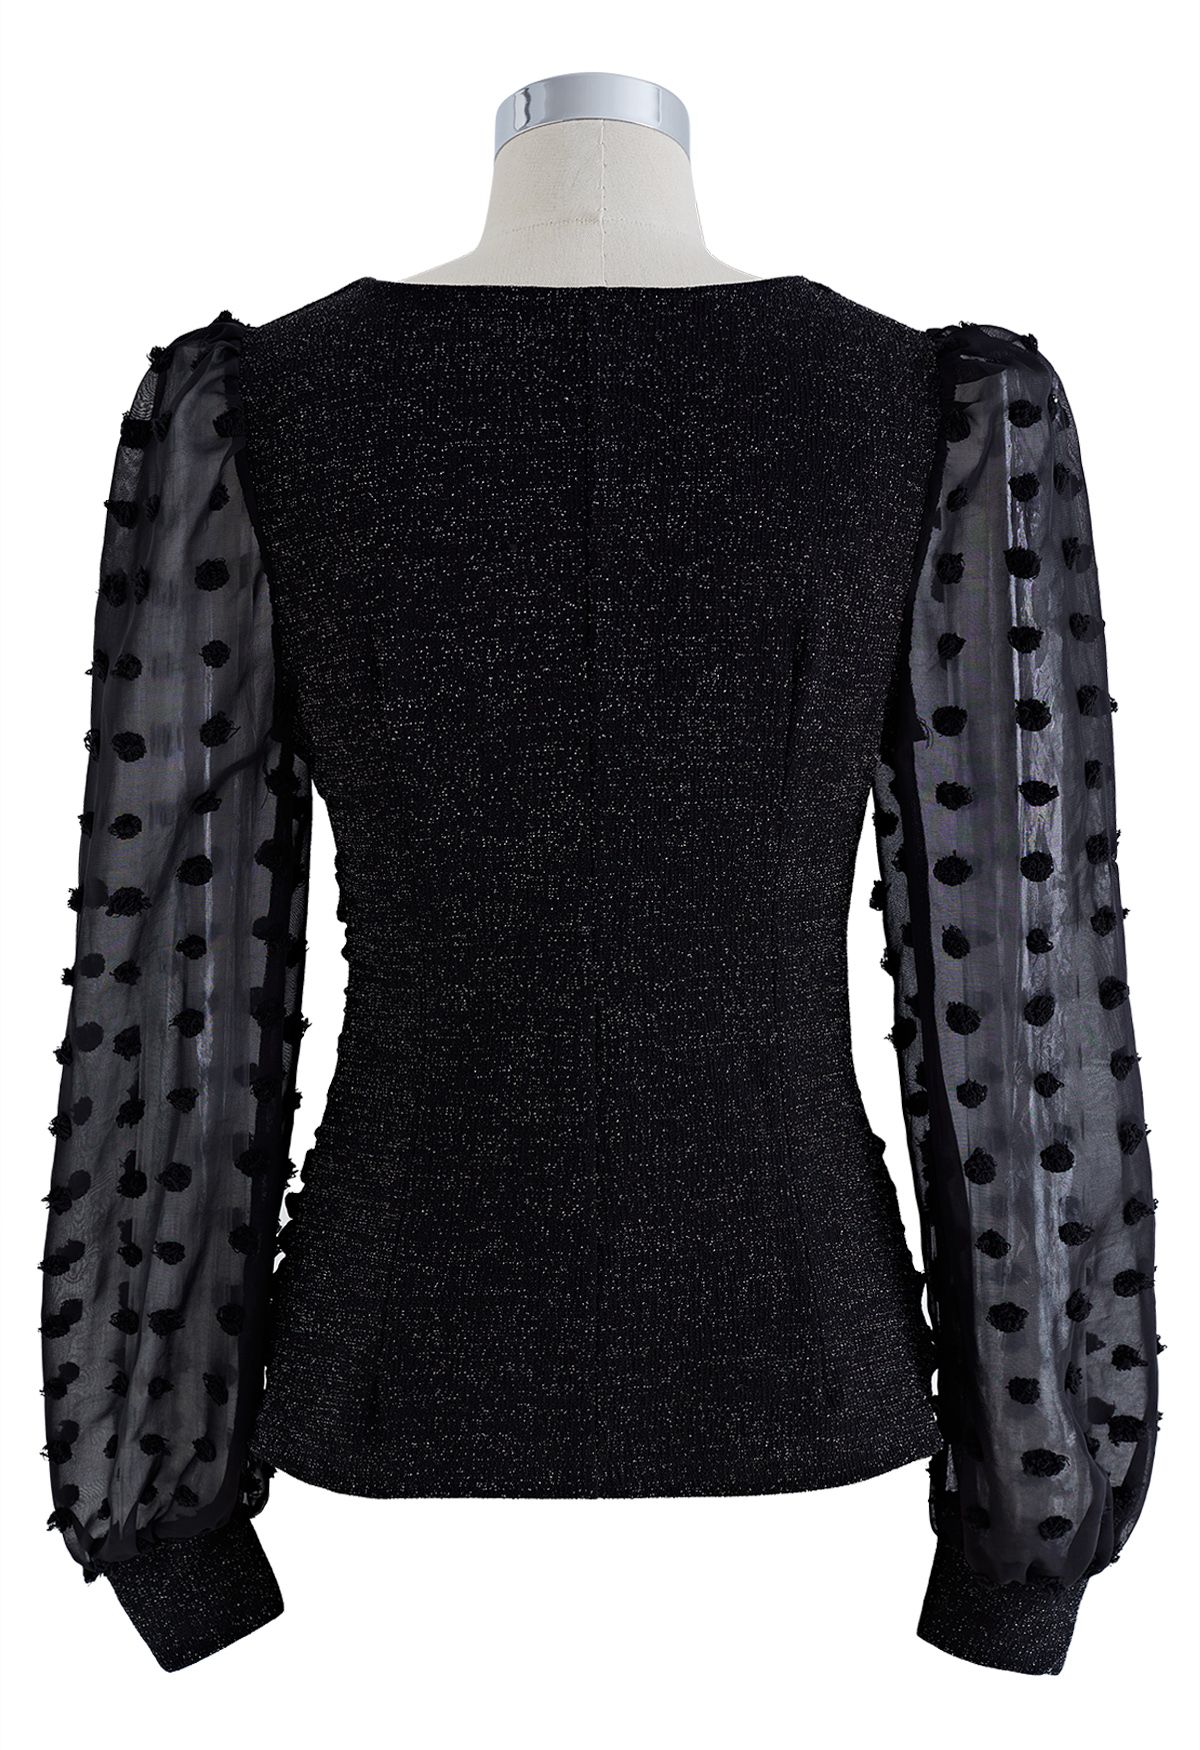 Sweetheart Neck Ruched Spliced Shimmer Top in Black - Retro, Indie and ...